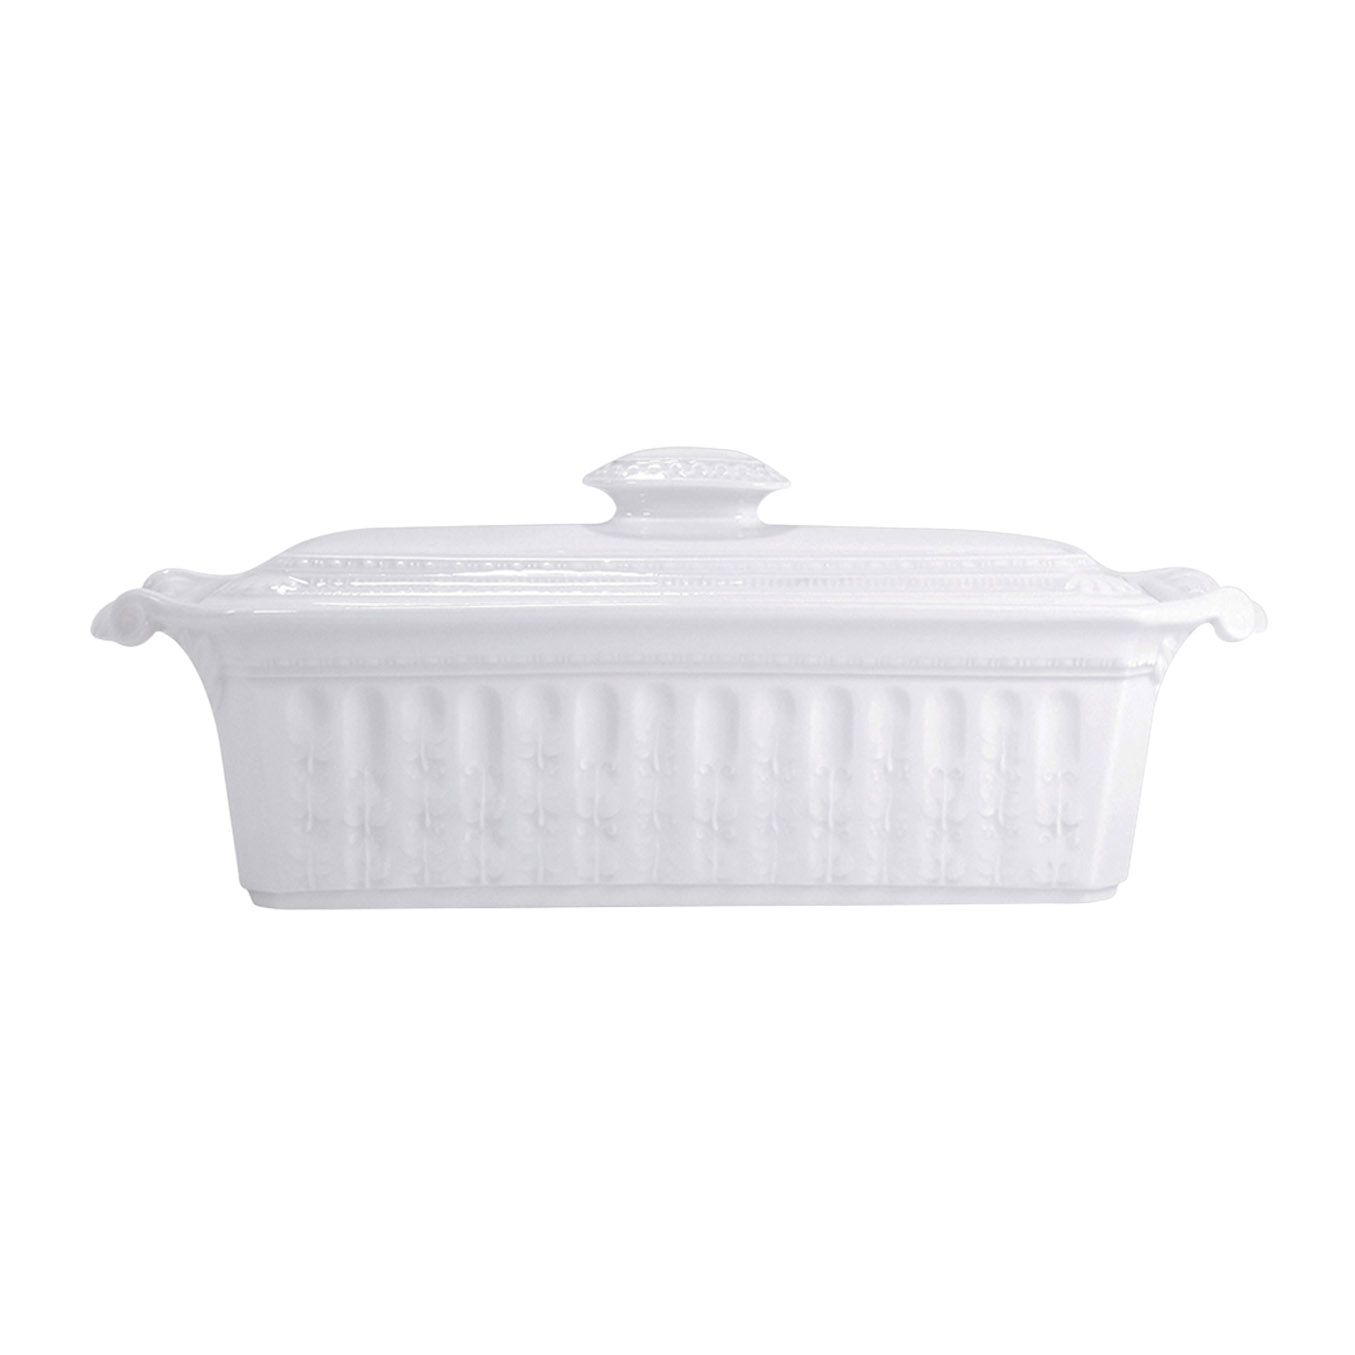 Clever Cooking rectangular baking dish with lid 34 x 24 cm